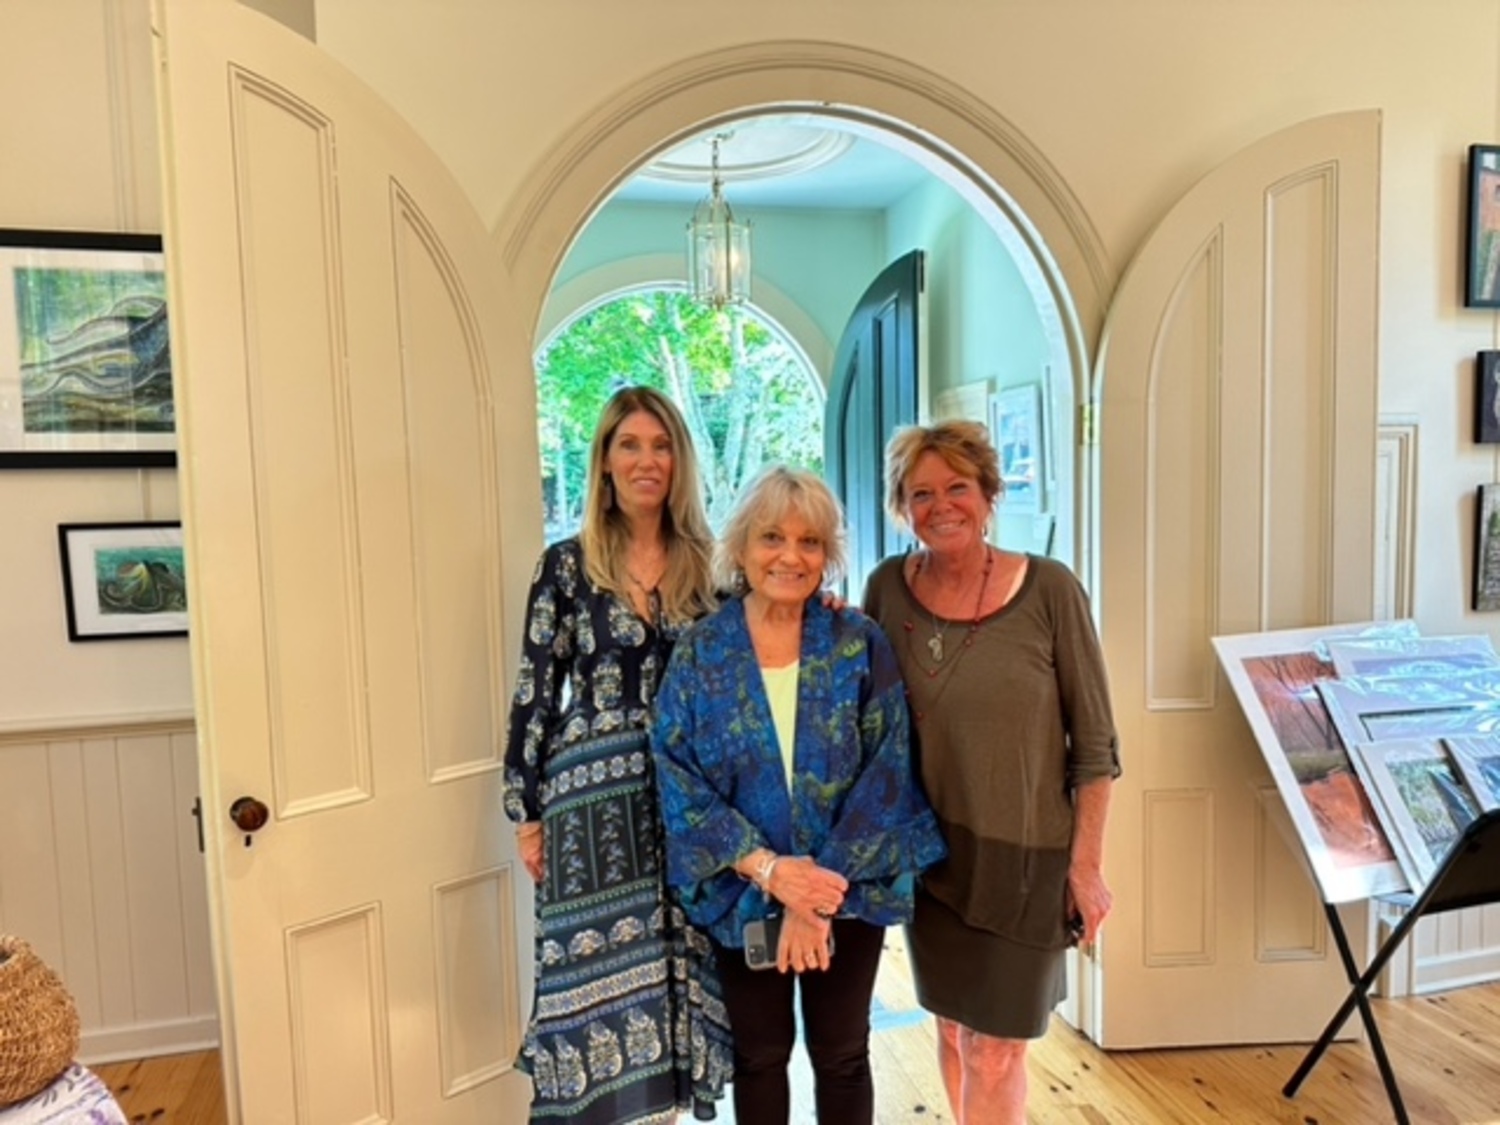 An opening reception for the art exhibit  “Land and Sea” was held at the Remsenburg Academy on Saturday. The show includes the works of, from left, Peggy Flaum and Ceil Frank and Chris Cohen. COURTESY REMSENBURG ACADEMY